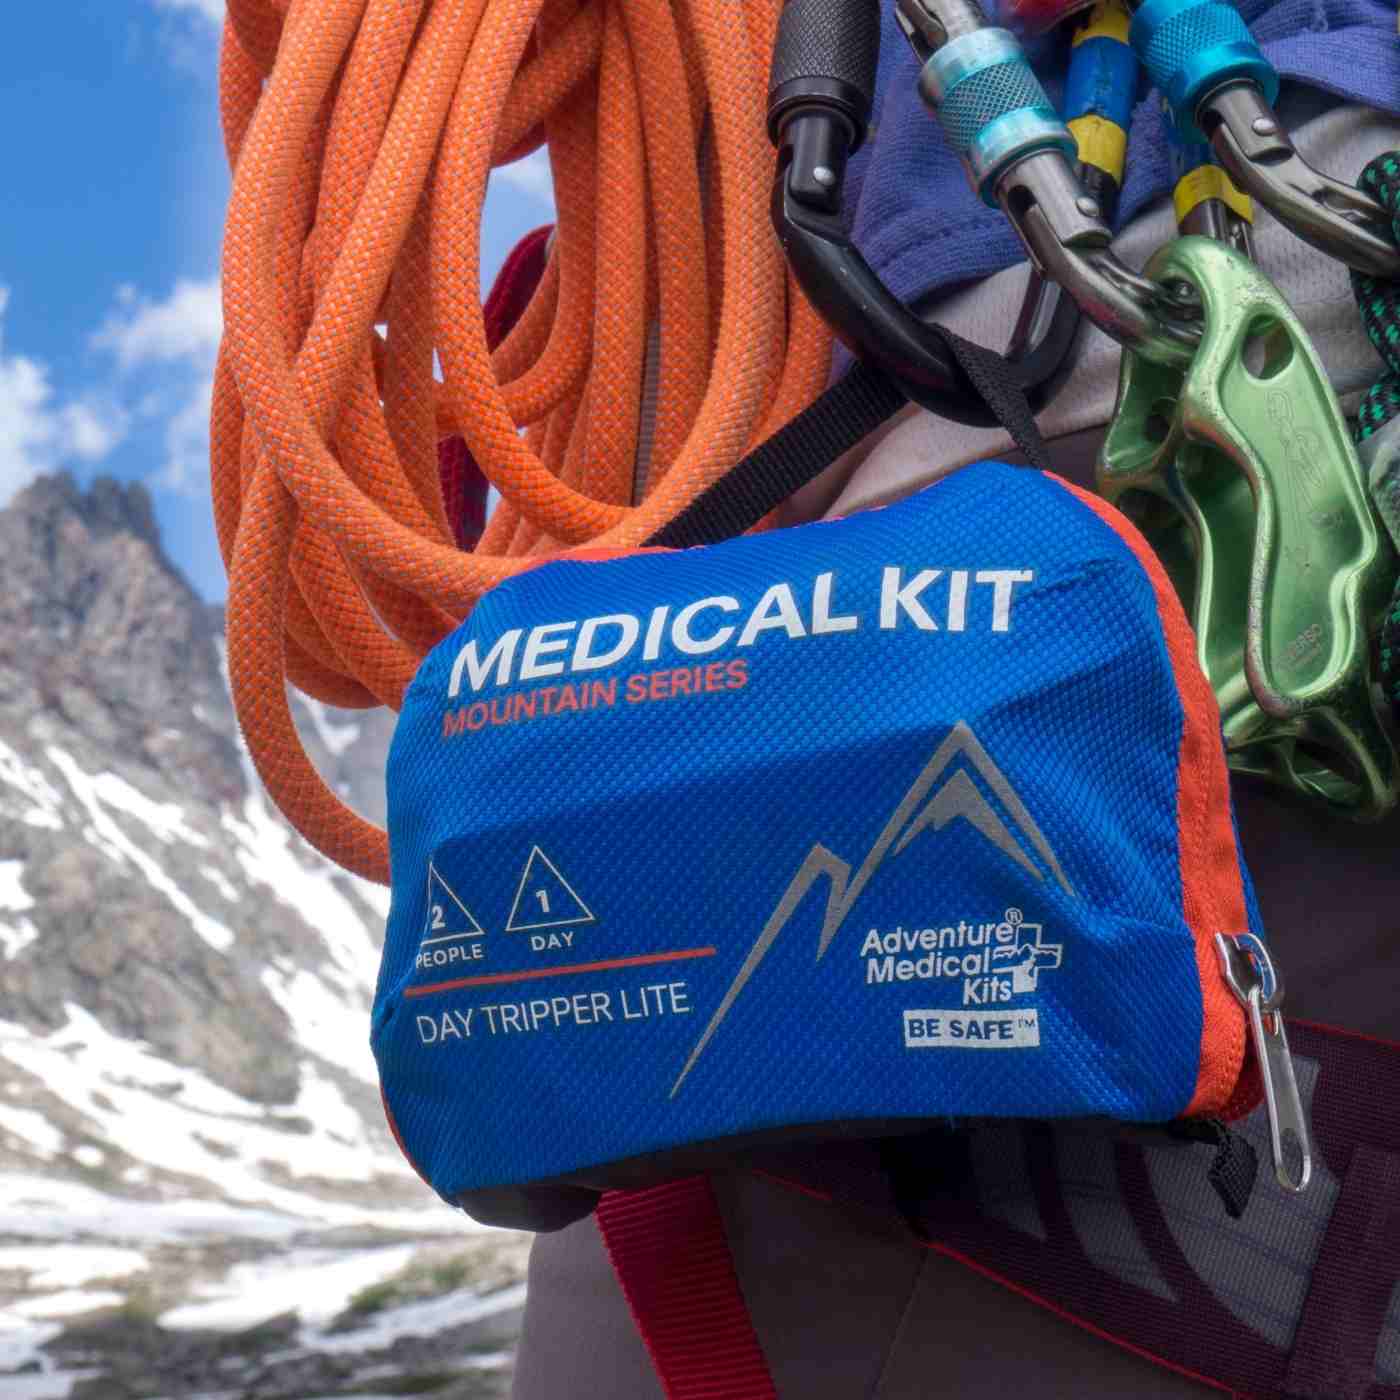 Mountain Series Medical Kit - Day Tripper Lite kit on climbers gear in front of mountains